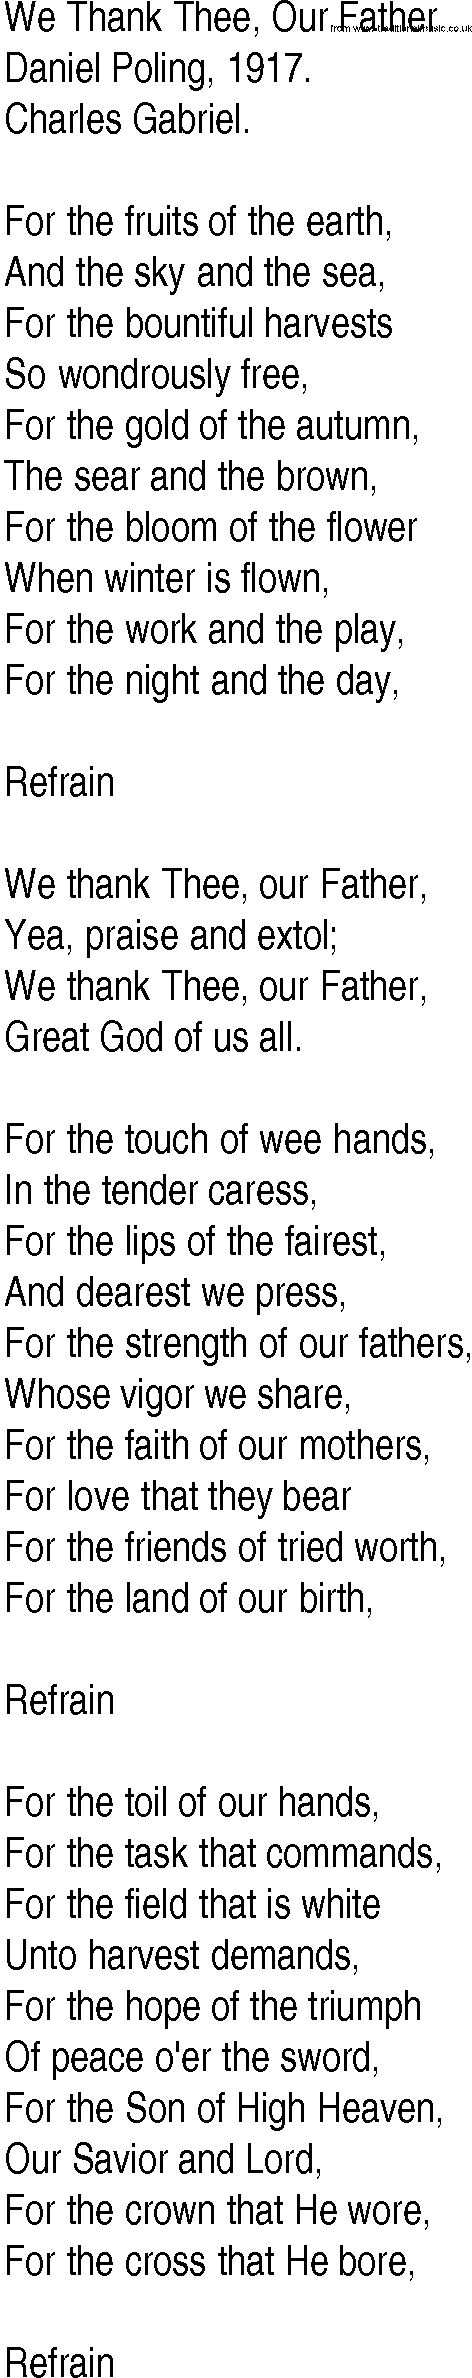 Hymn and Gospel Song: We Thank Thee, Our Father by Daniel Poling lyrics